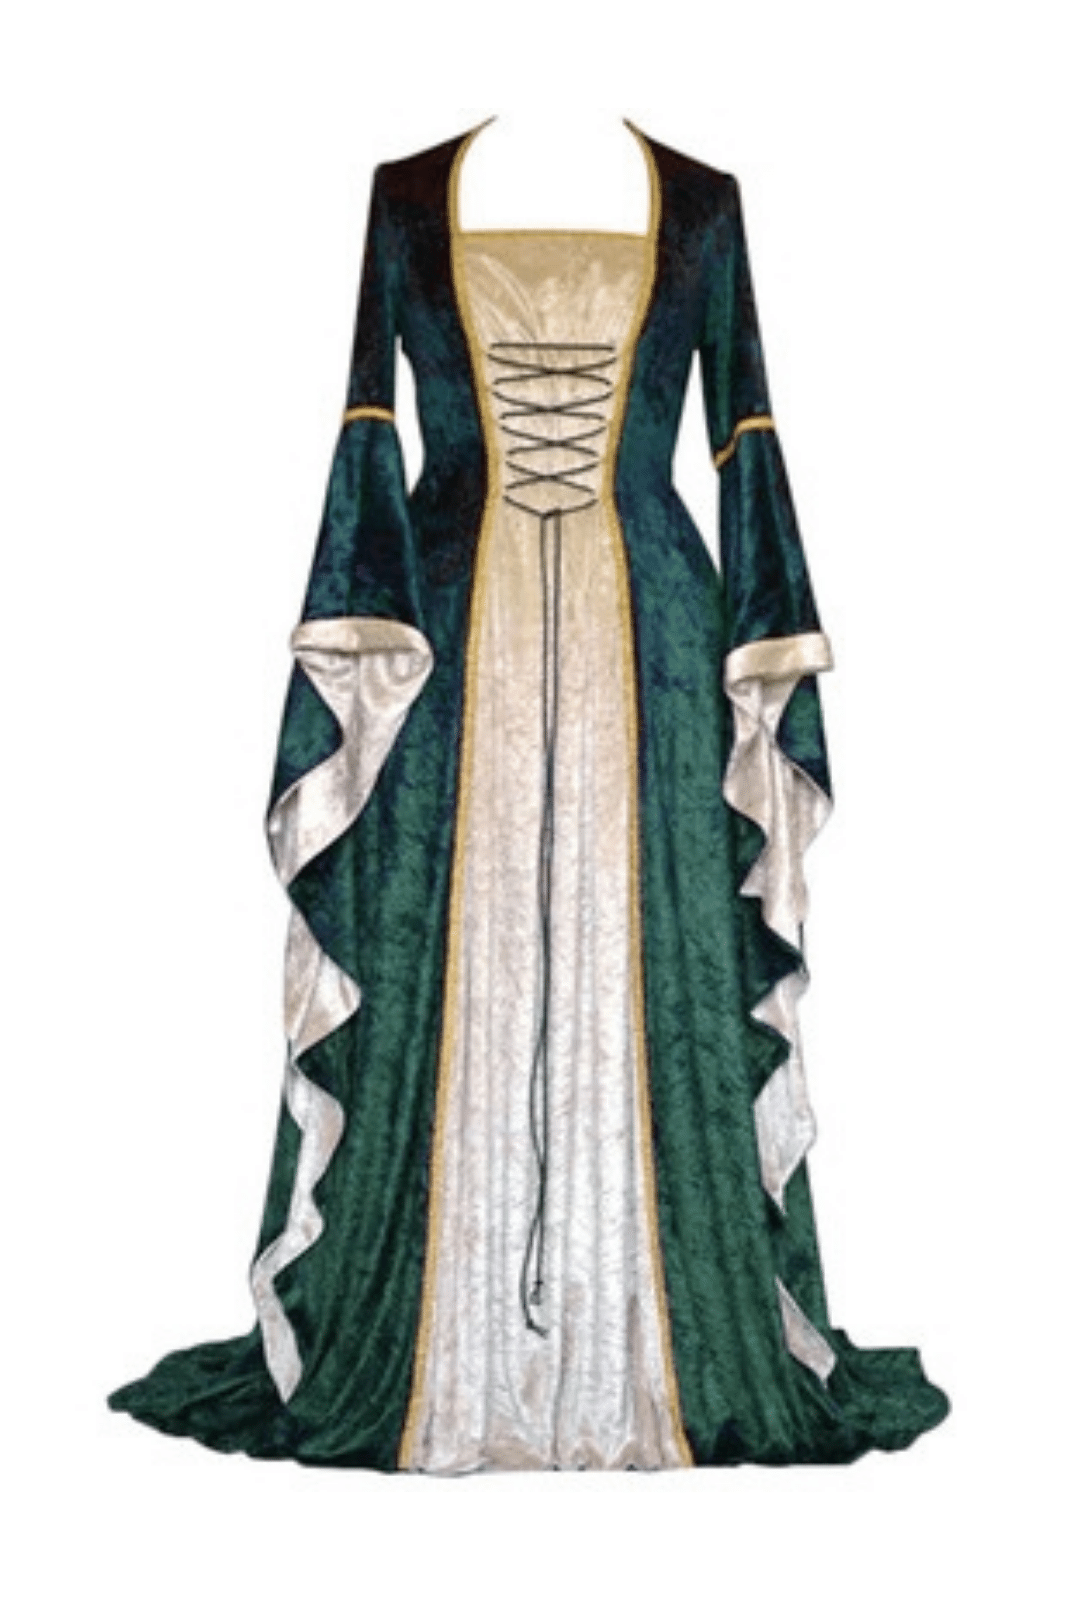 Green and Gold Long Medieval Dress